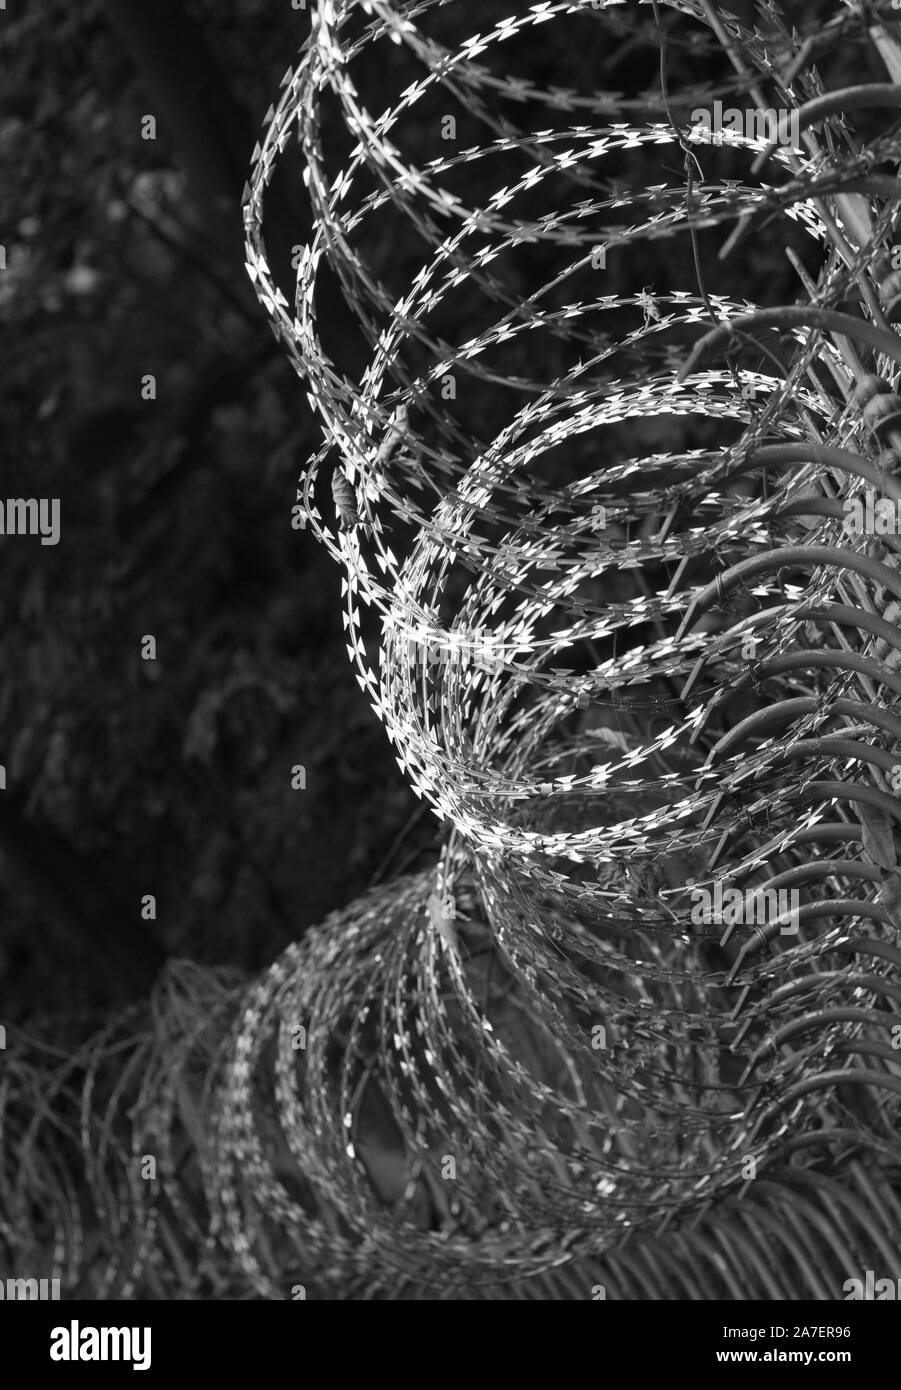 Monochrome of barbed wire security fence Stock Photo